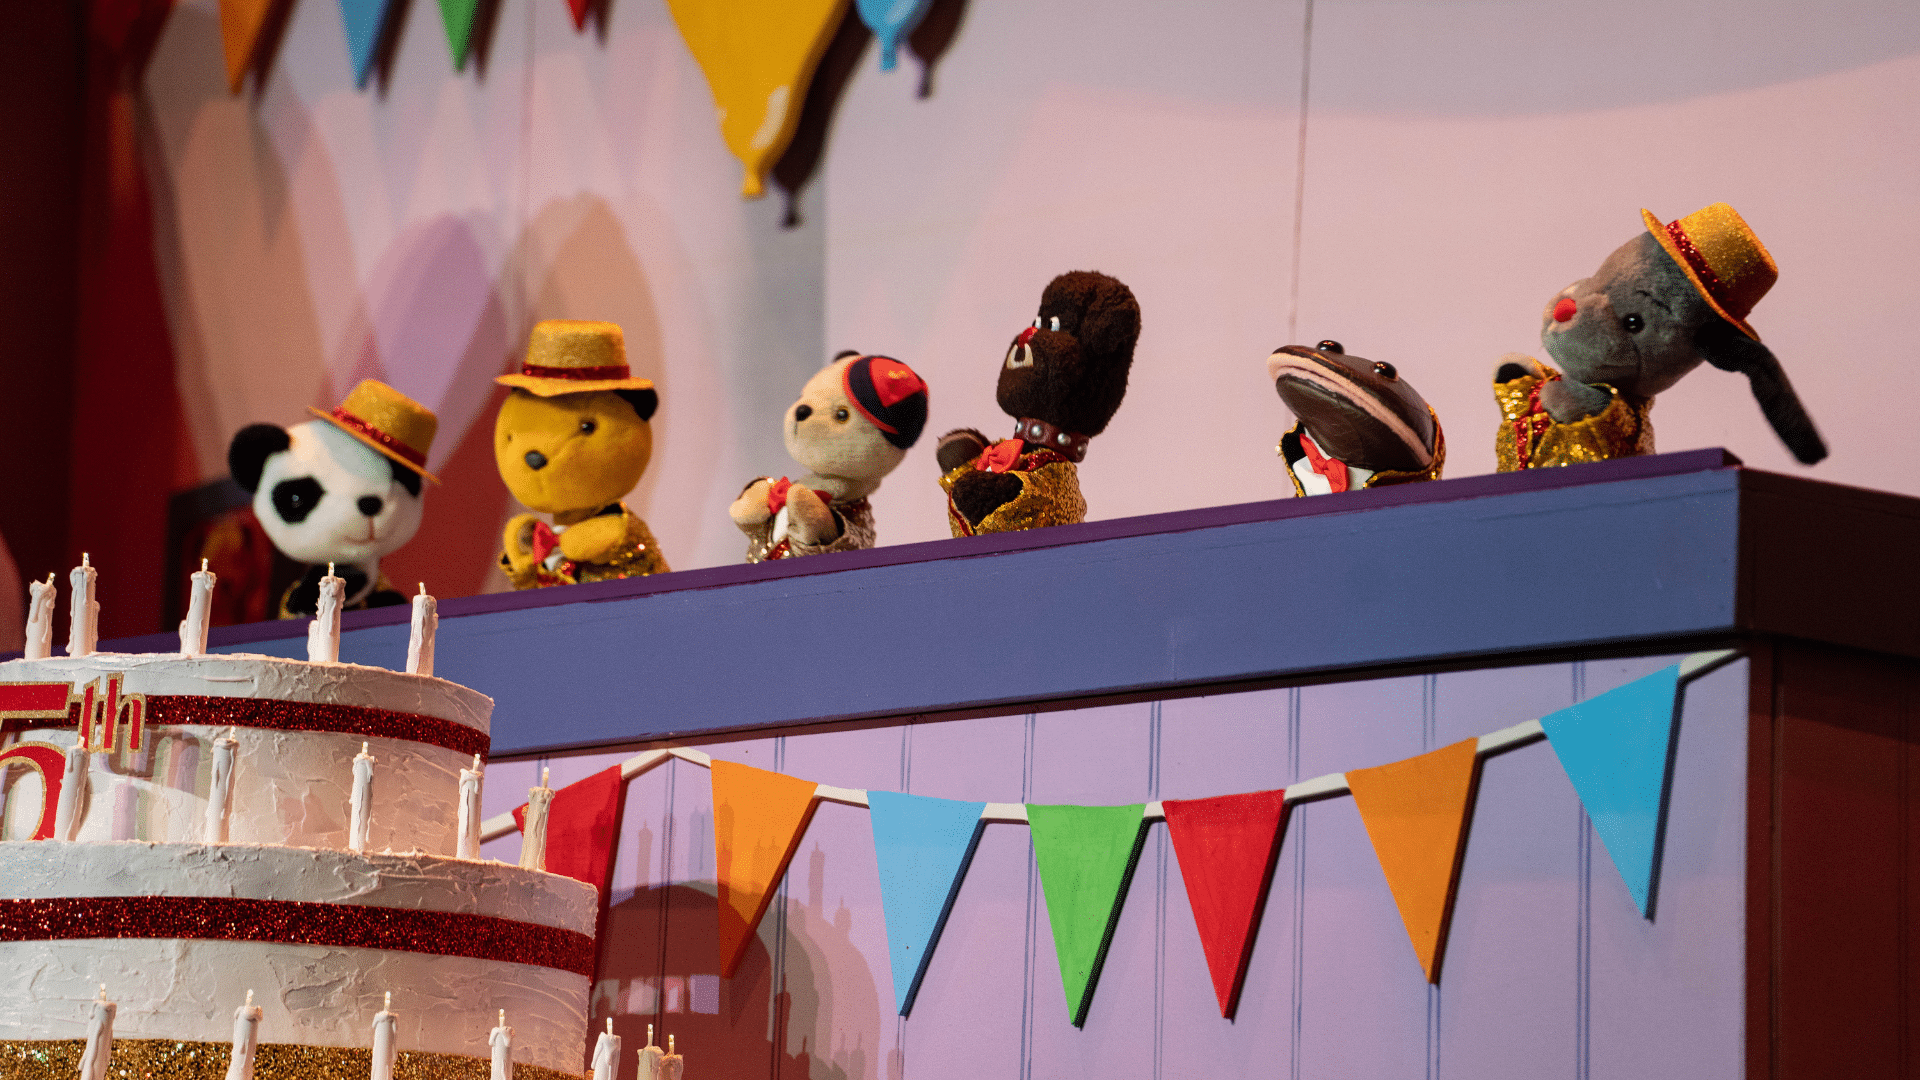 The Sooty Show production image: Sooty and his puppet friends look at a large cake with candles on it; there is bunting along the purple wooden walls.